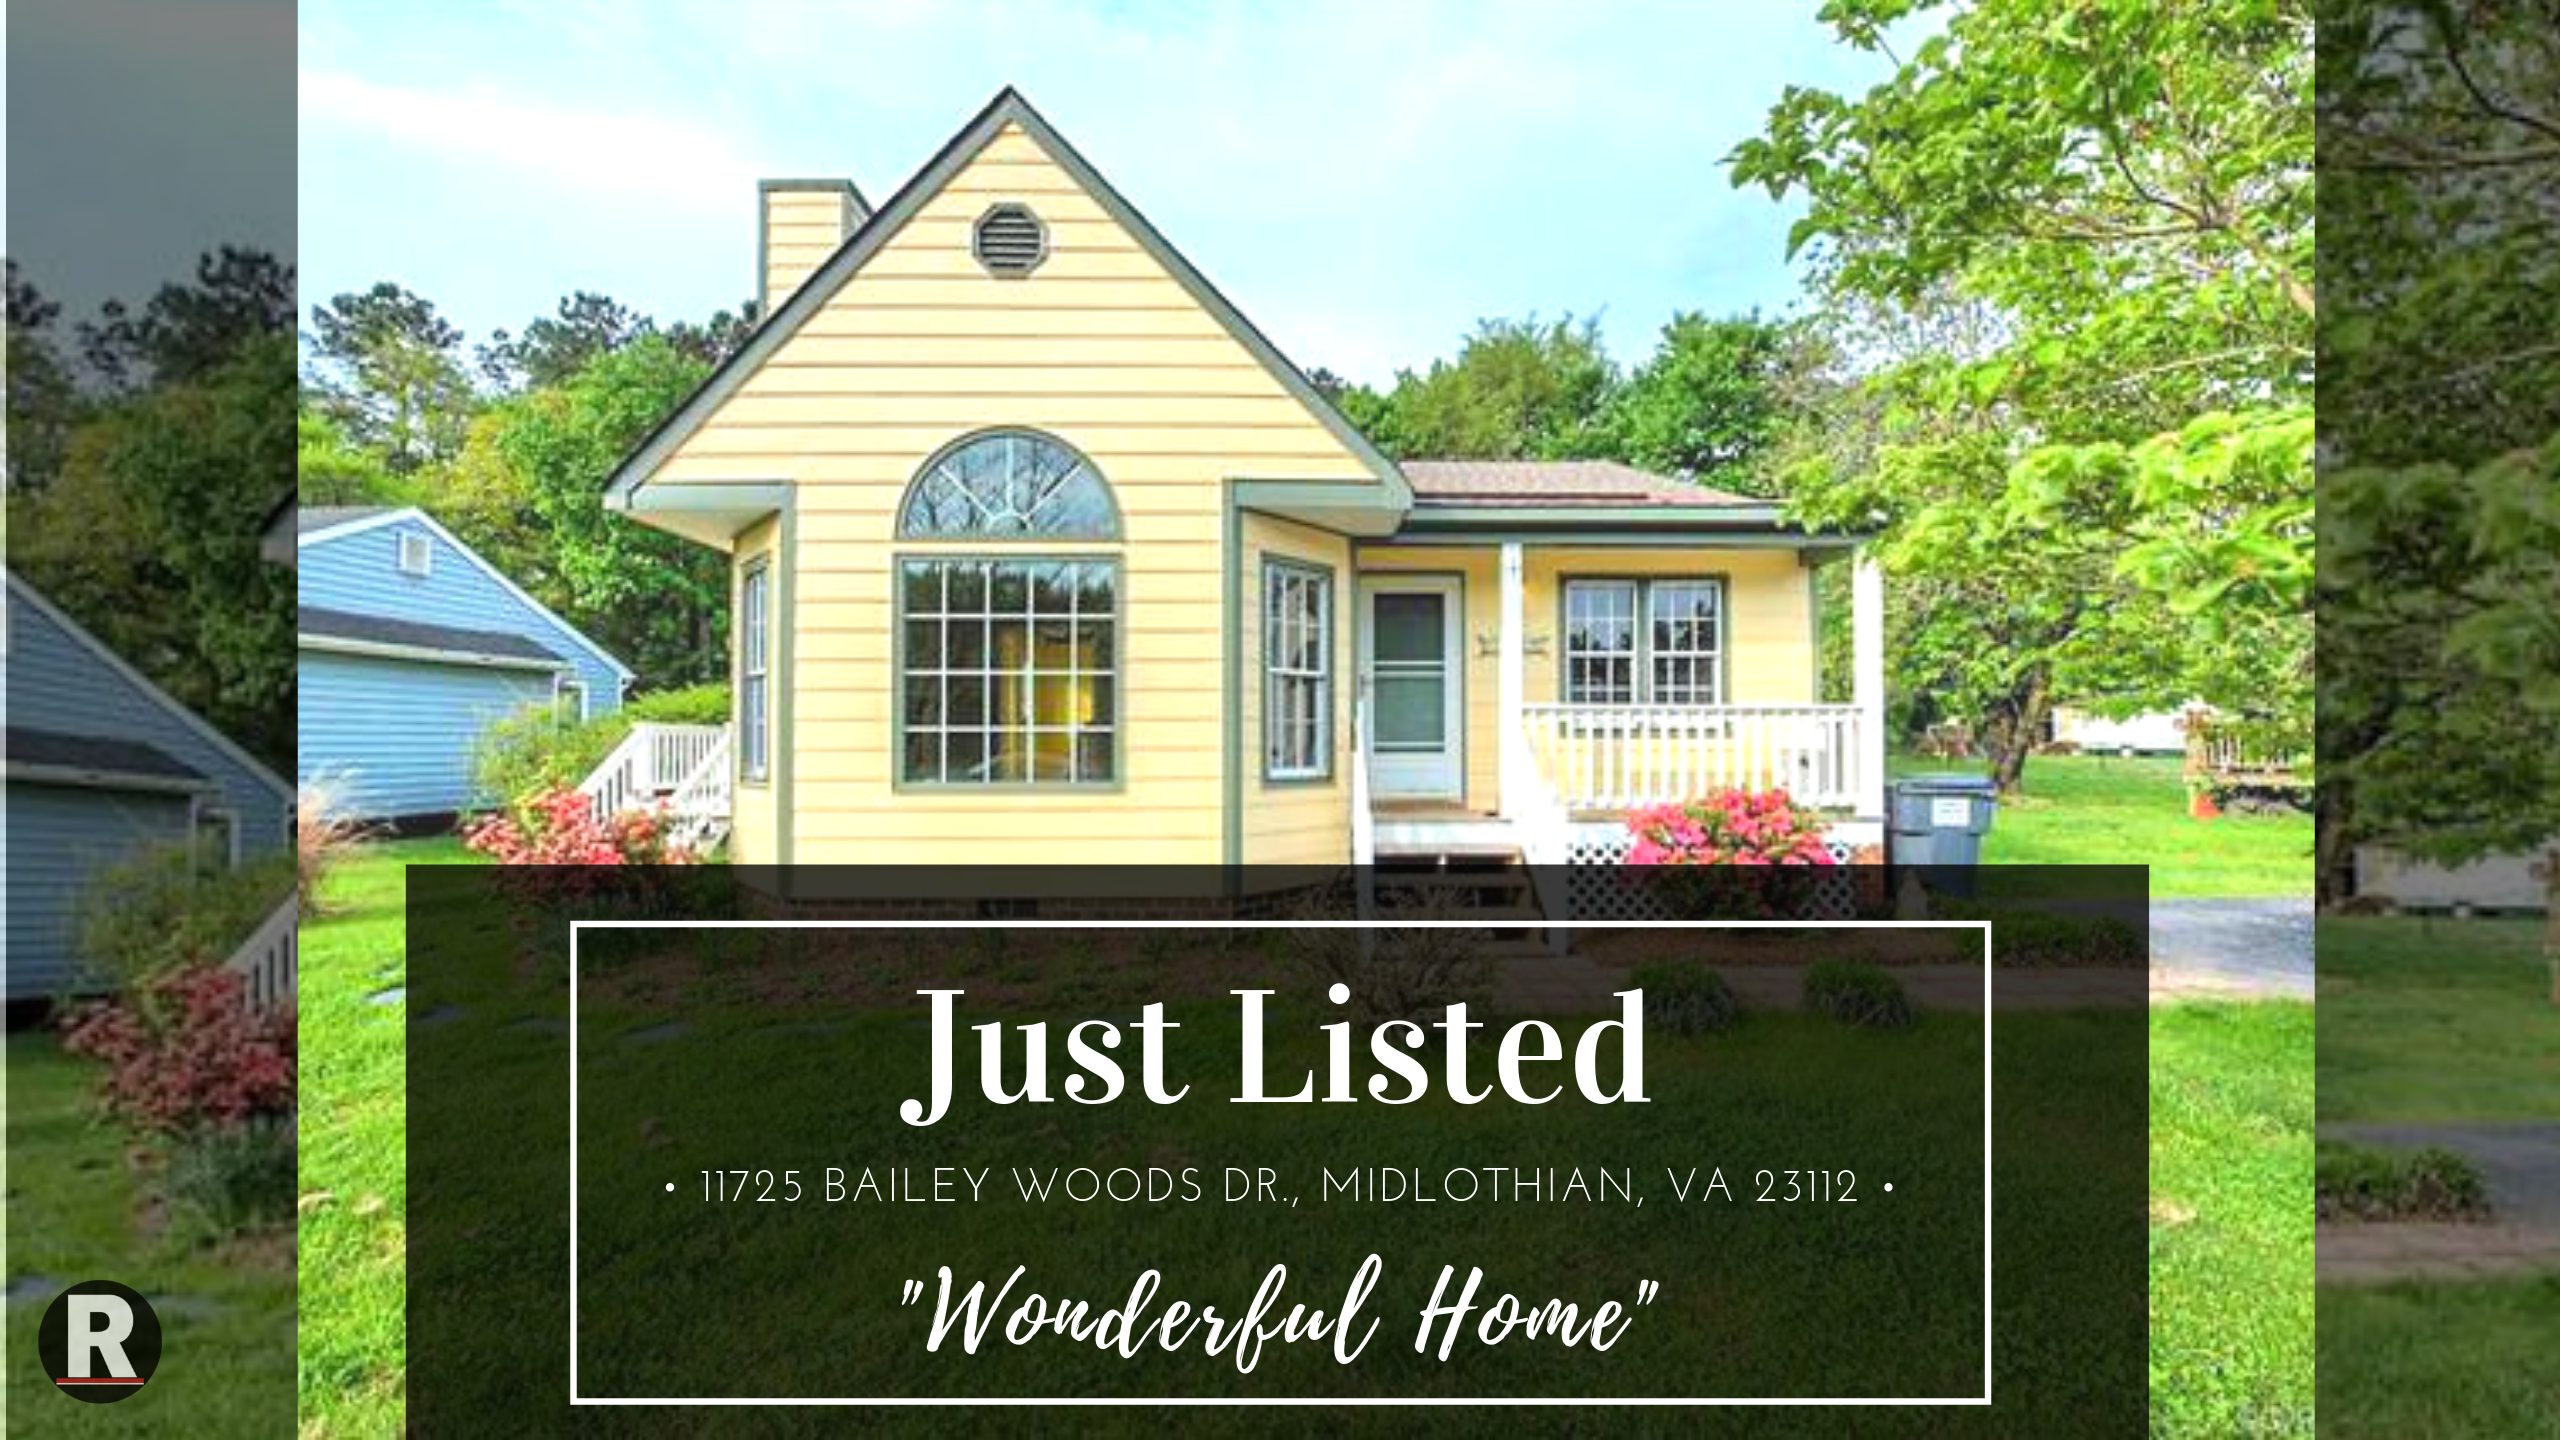 Just Listed! 11725 Bailey Woods Dr., Midlothian, VA 23112